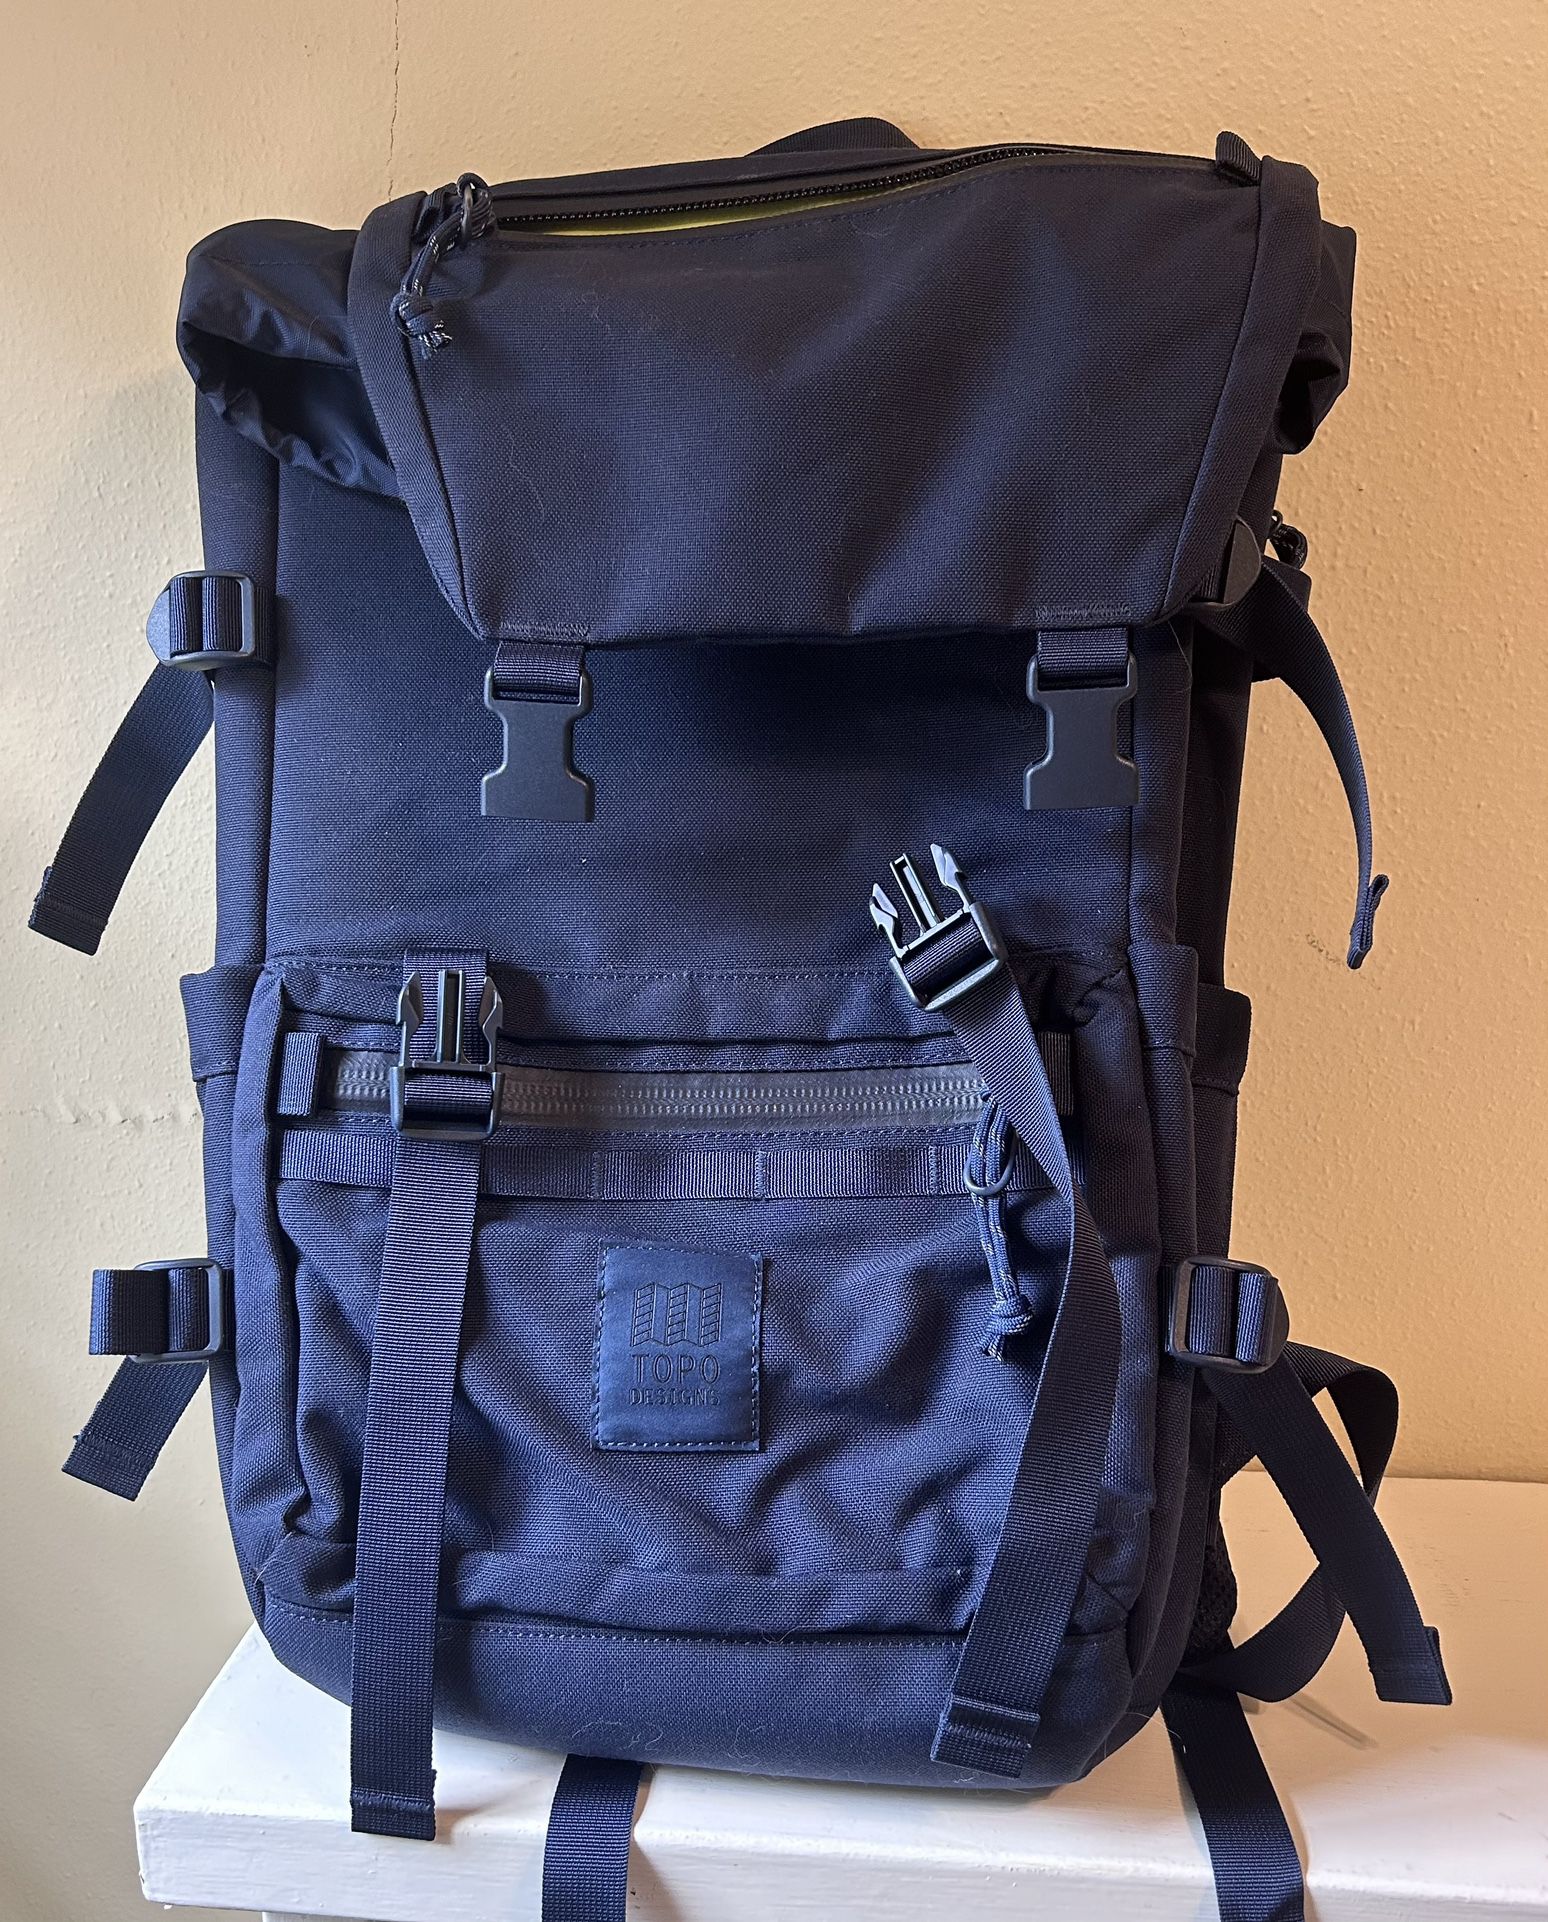 New Topo Designs Backpack 